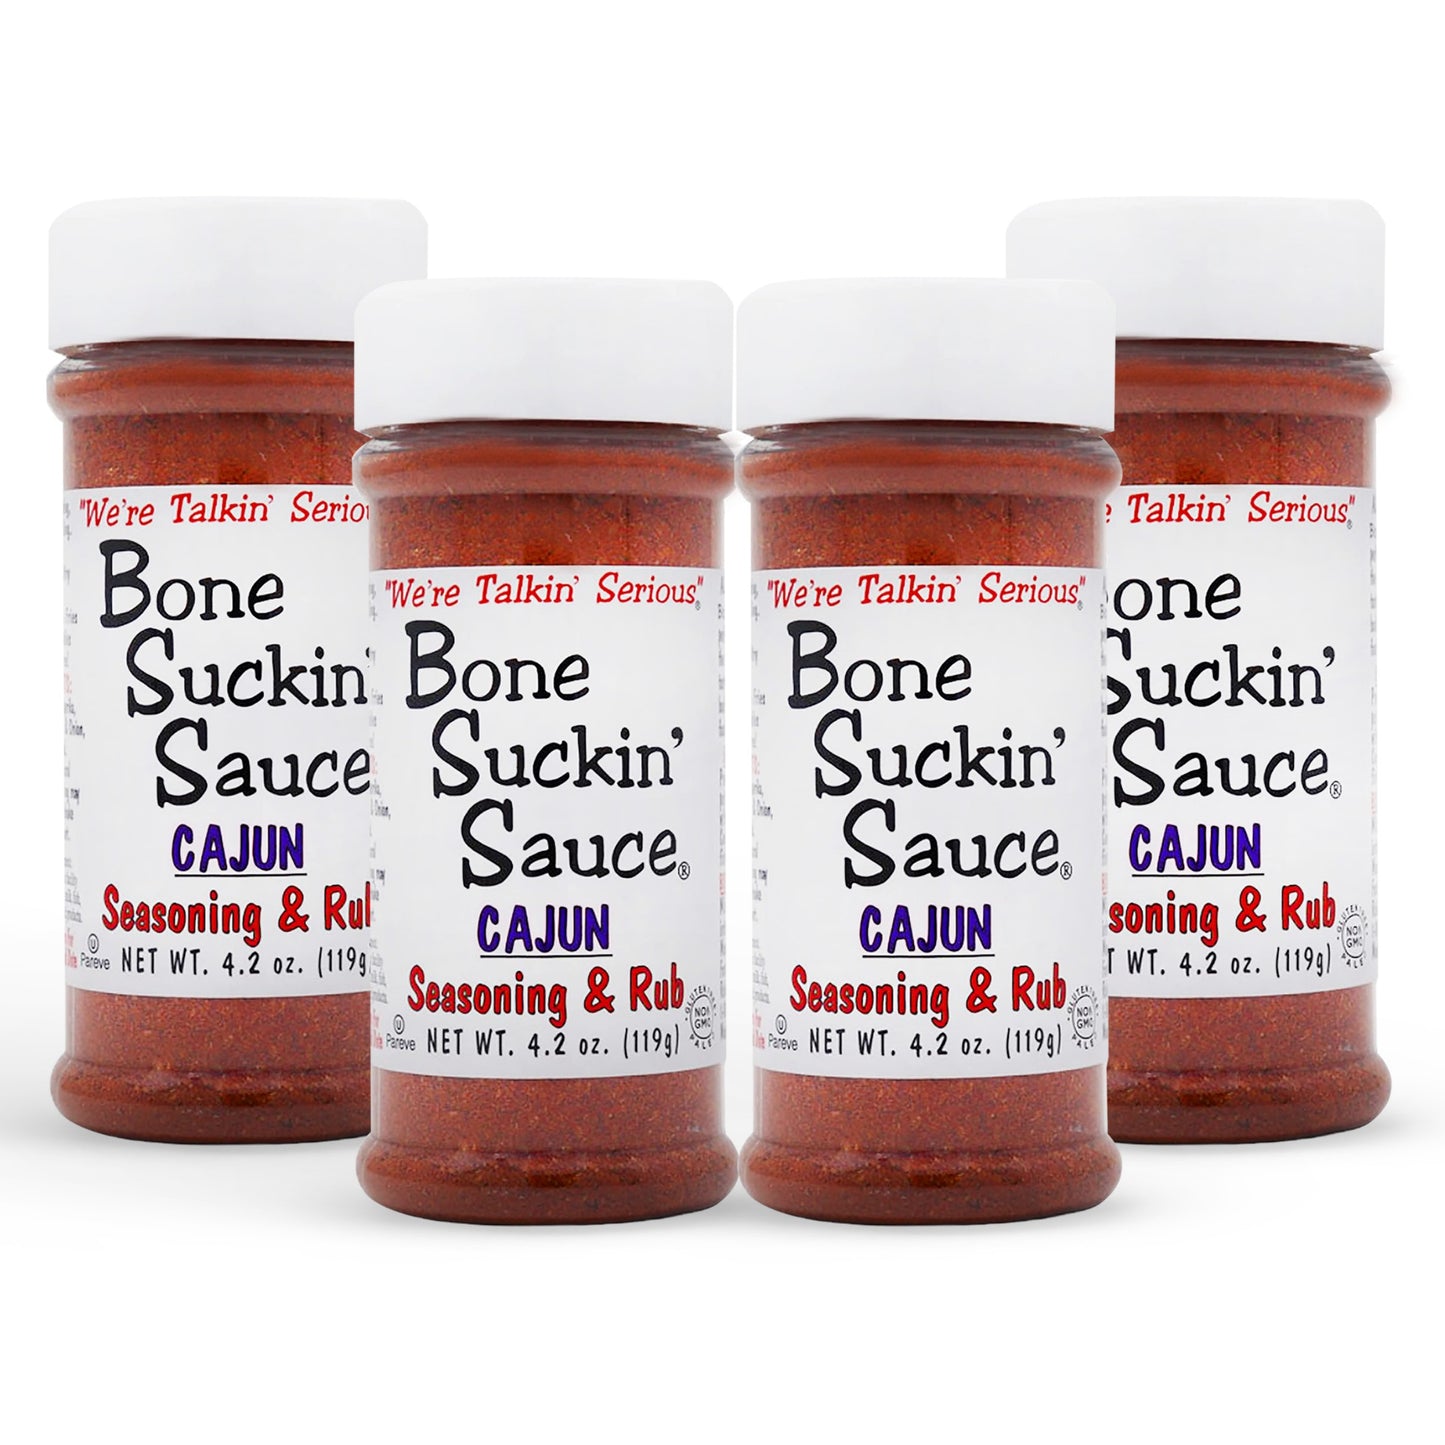 Bone Suckin'® Cajun Seasoning & Rub, 4.2 oz., is the perfect blend of Cajun spices & herbs along with the right amount of heat. It makes your food taste great, gets friends talking & coming back for more! Use generously & your Cajun food will be "Bone Suckin'® Good!" Use On Seafood, Poultry, Steaks, Pork, Pasta, French Fries, Rice, Vegetables, Gumbos, Jambalayas & more! 4 pack